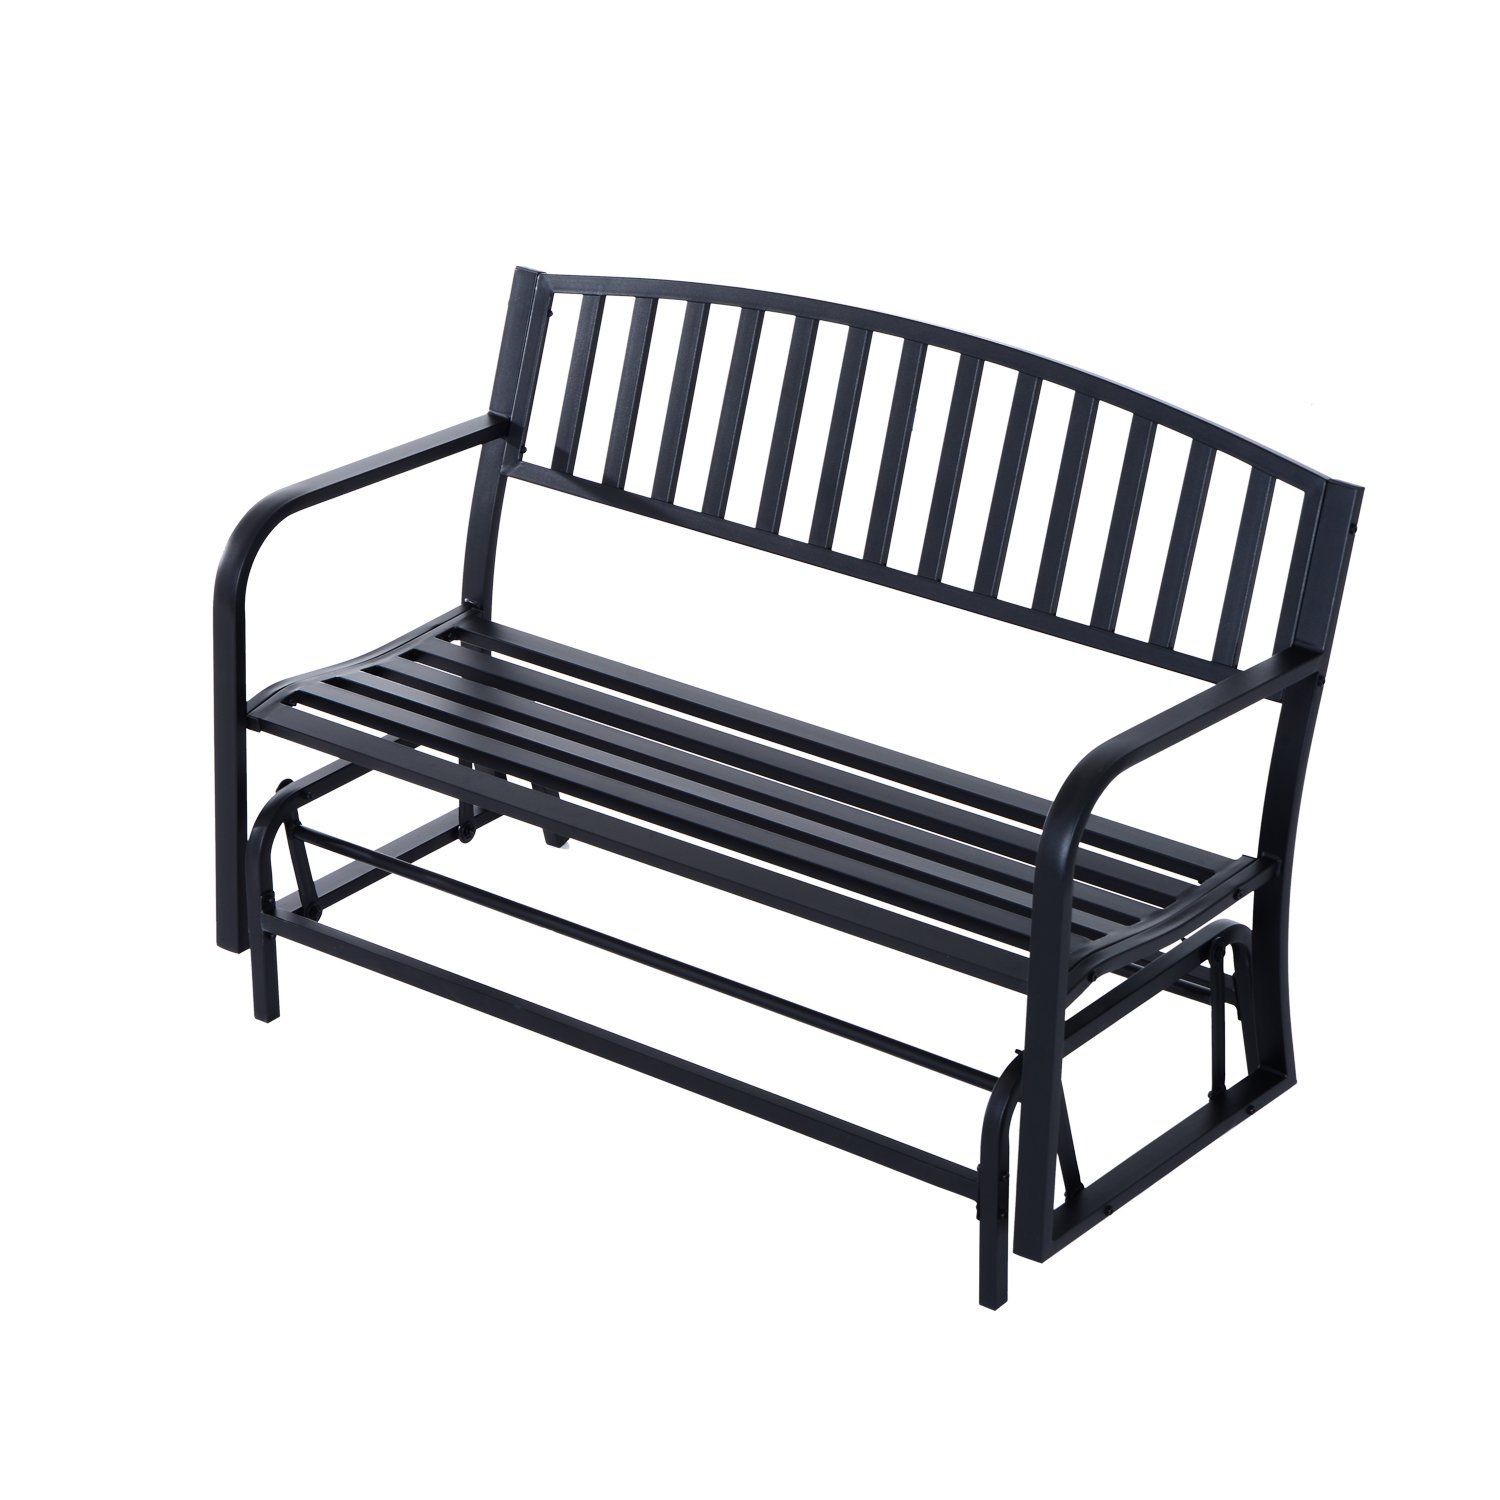 50" Outdoor Steel Patio Swing Glider Bench – Black In Black Outdoor Durable Steel Frame Patio Swing Glider Bench Chairs (View 24 of 25)